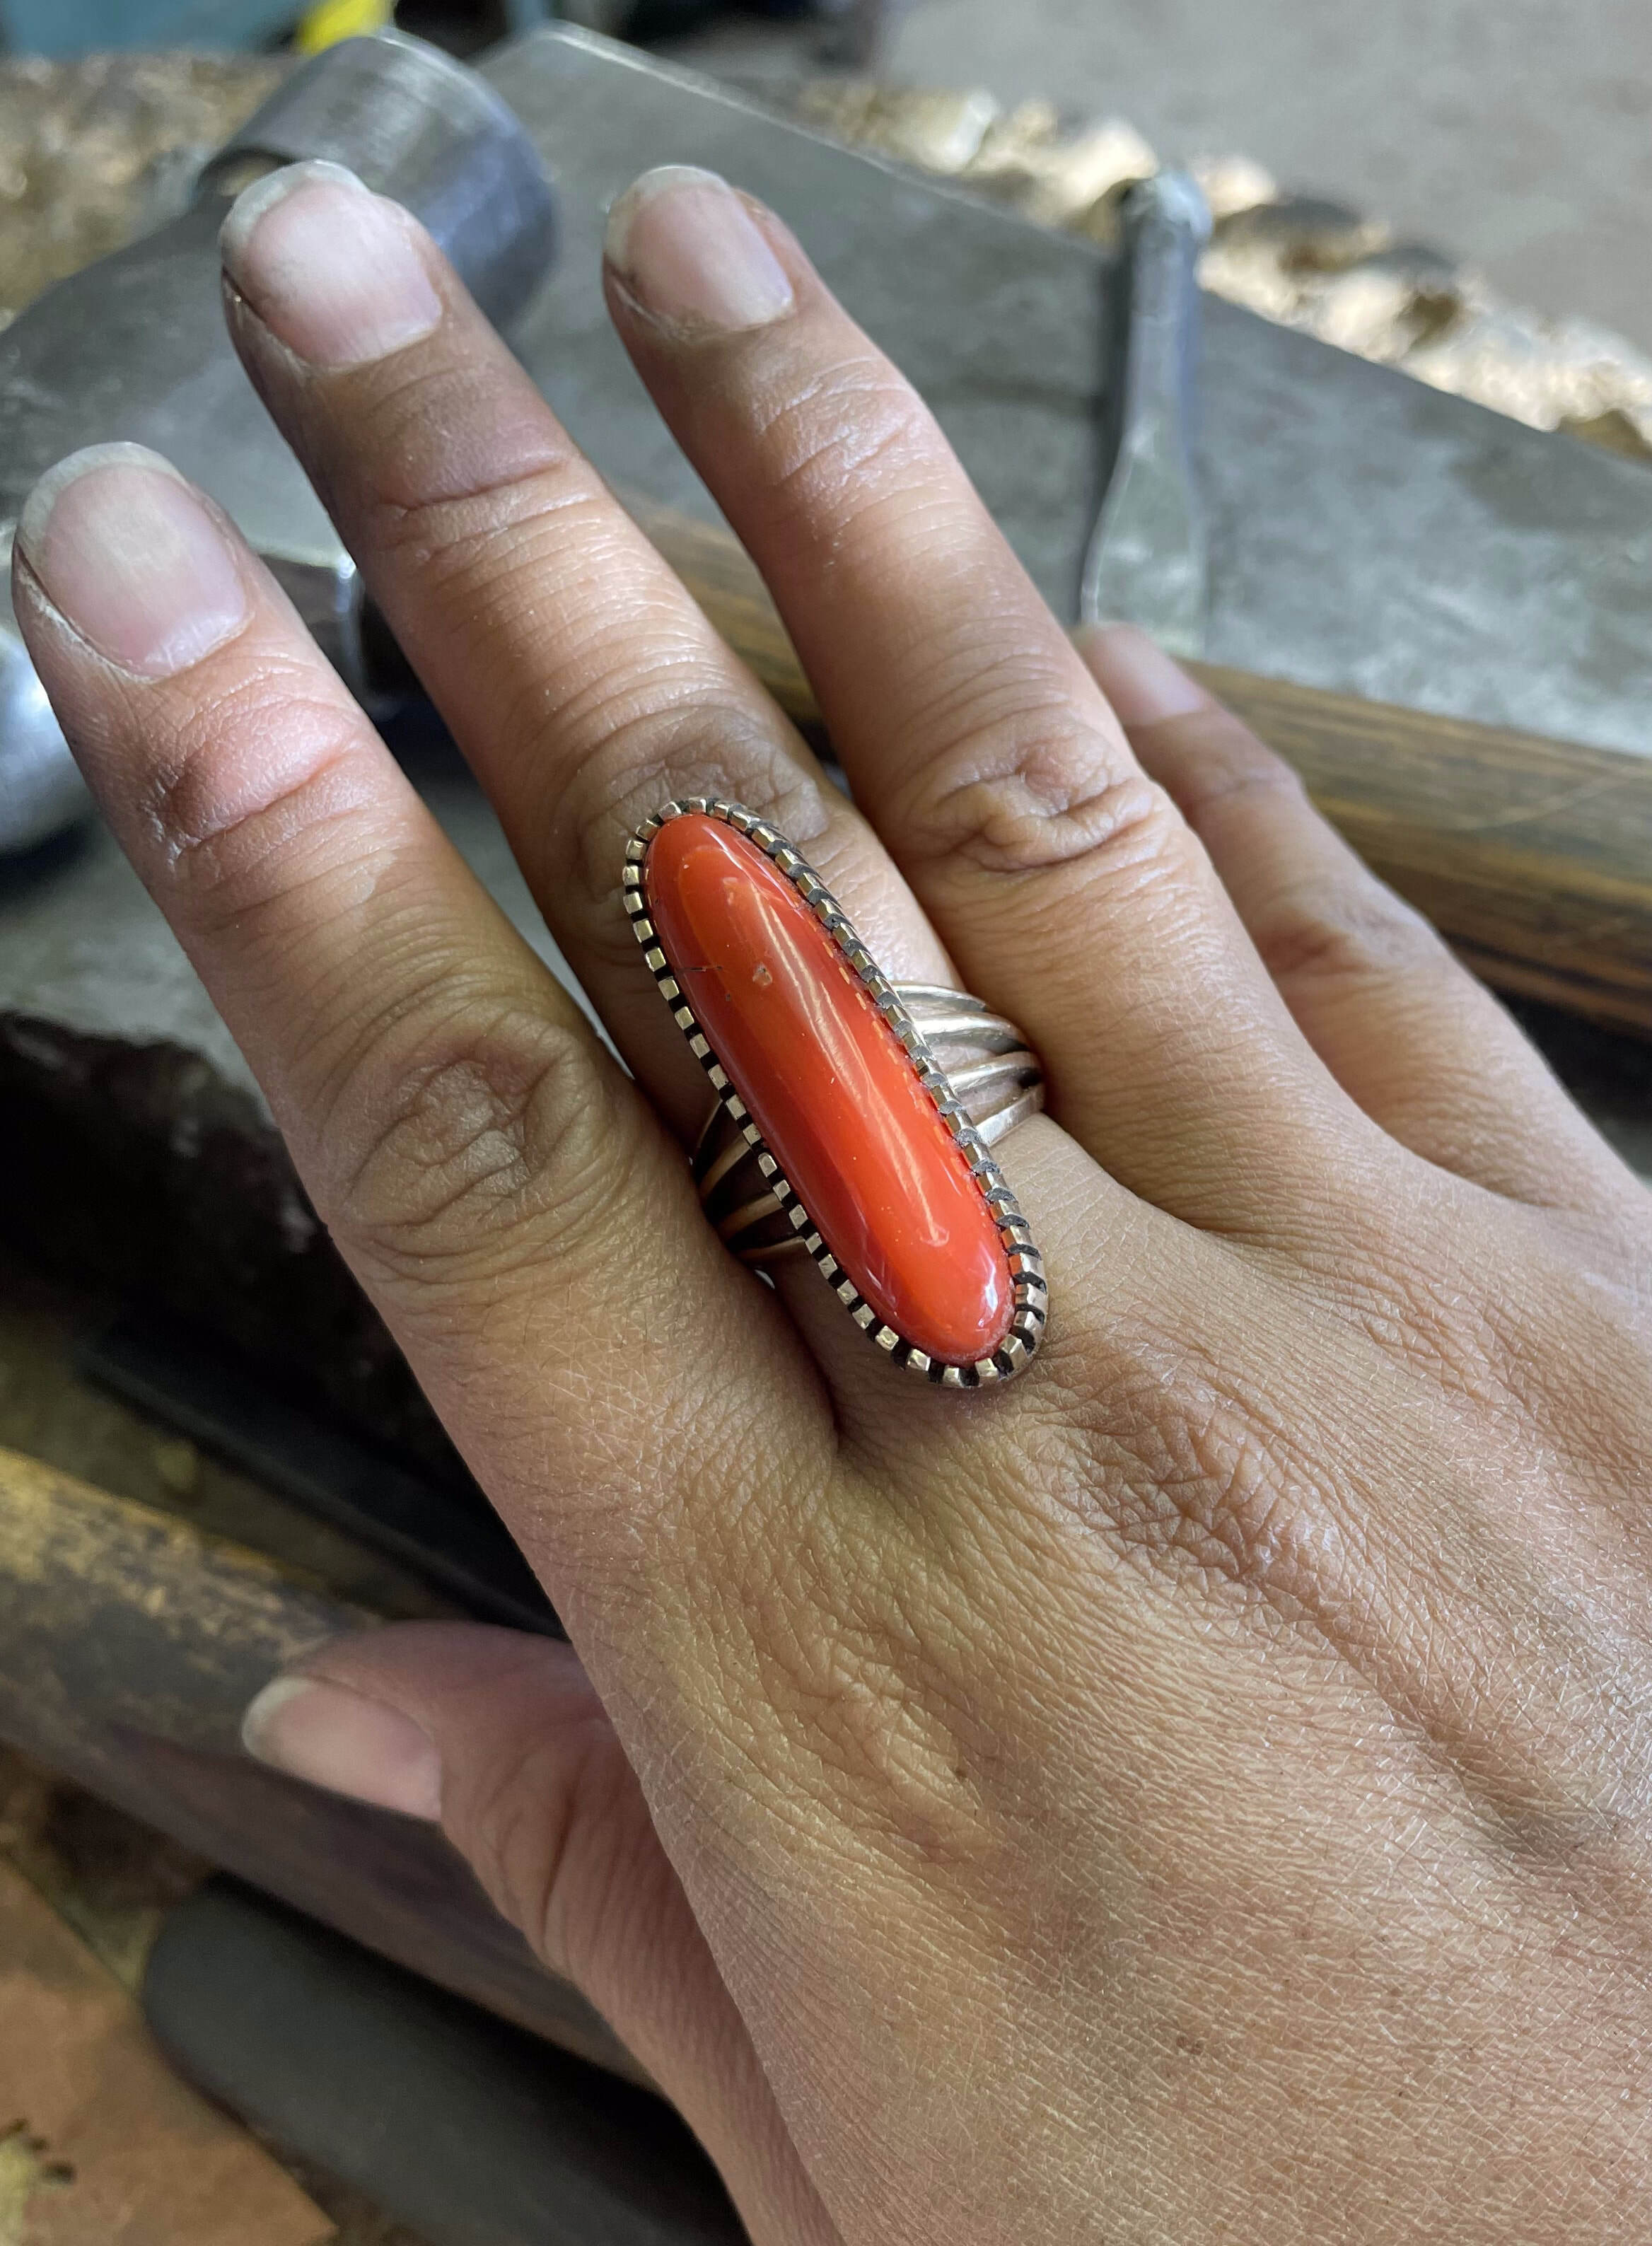 Customised Coral / Moonga Ring in 18K Gold